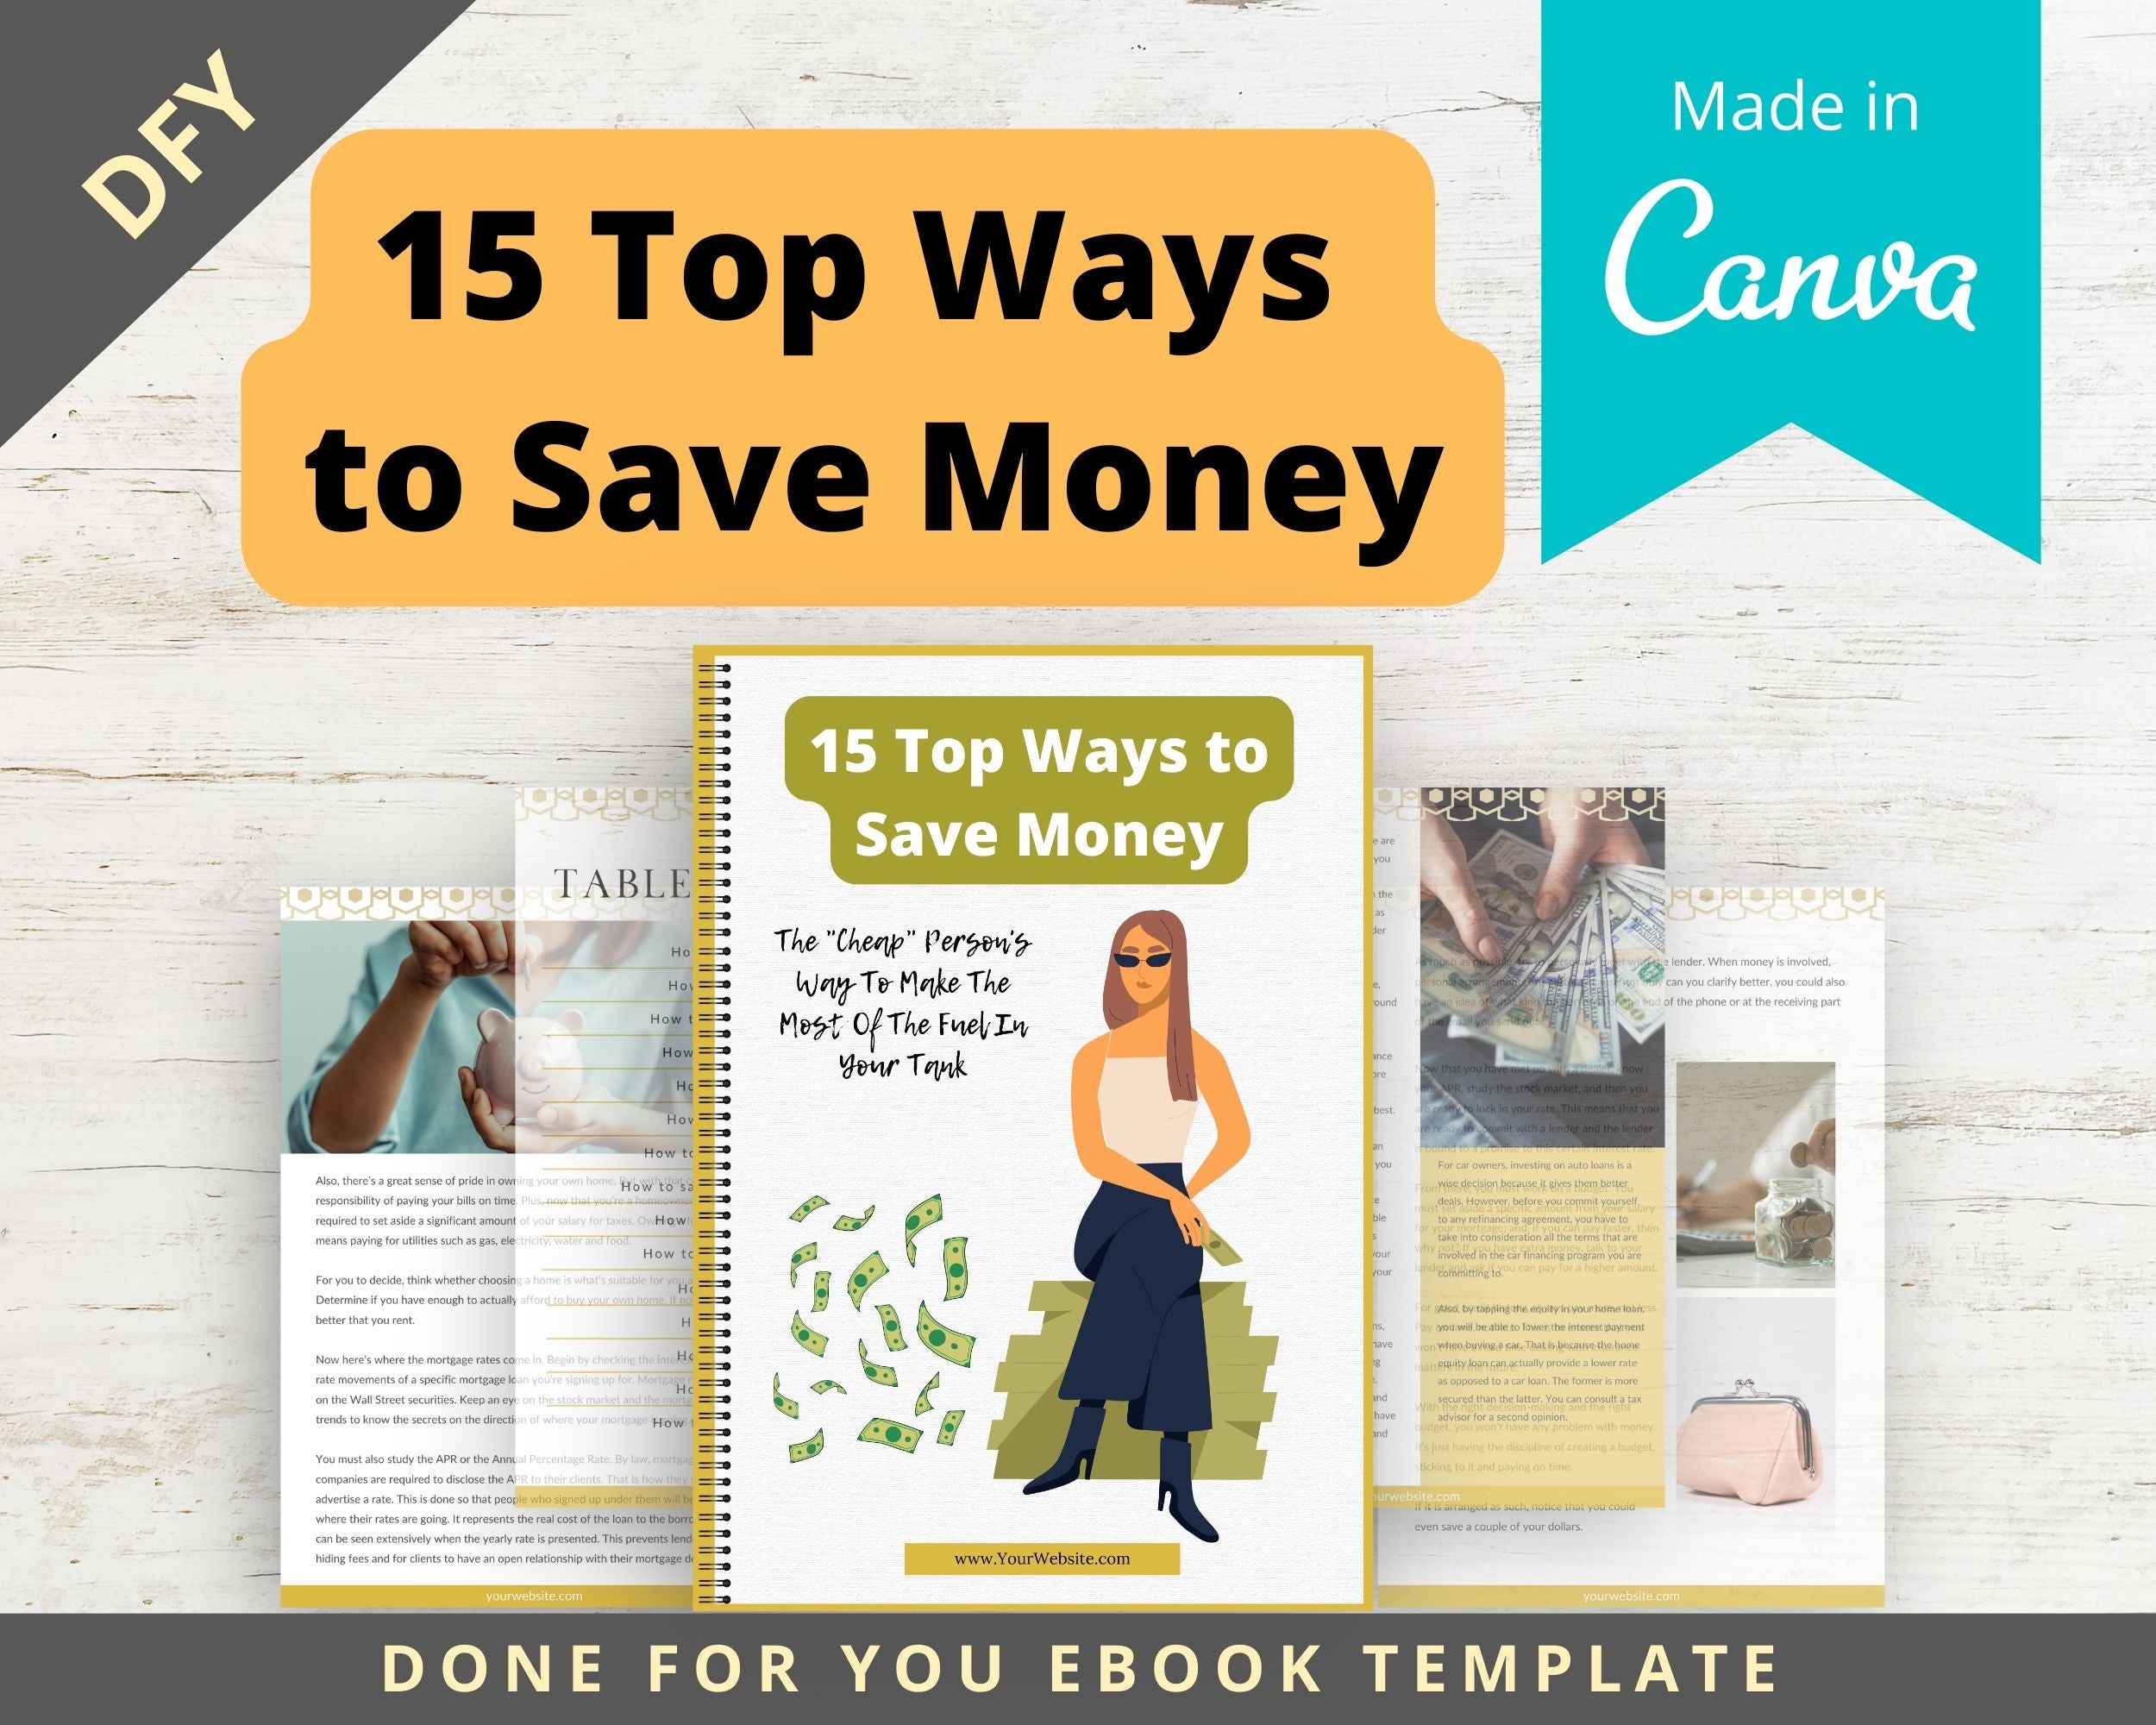 Editable 15 Top Ways to Save Money Ebook | Done-for-You Ebook in Canva | Rebrandable and Resizable Canva Template